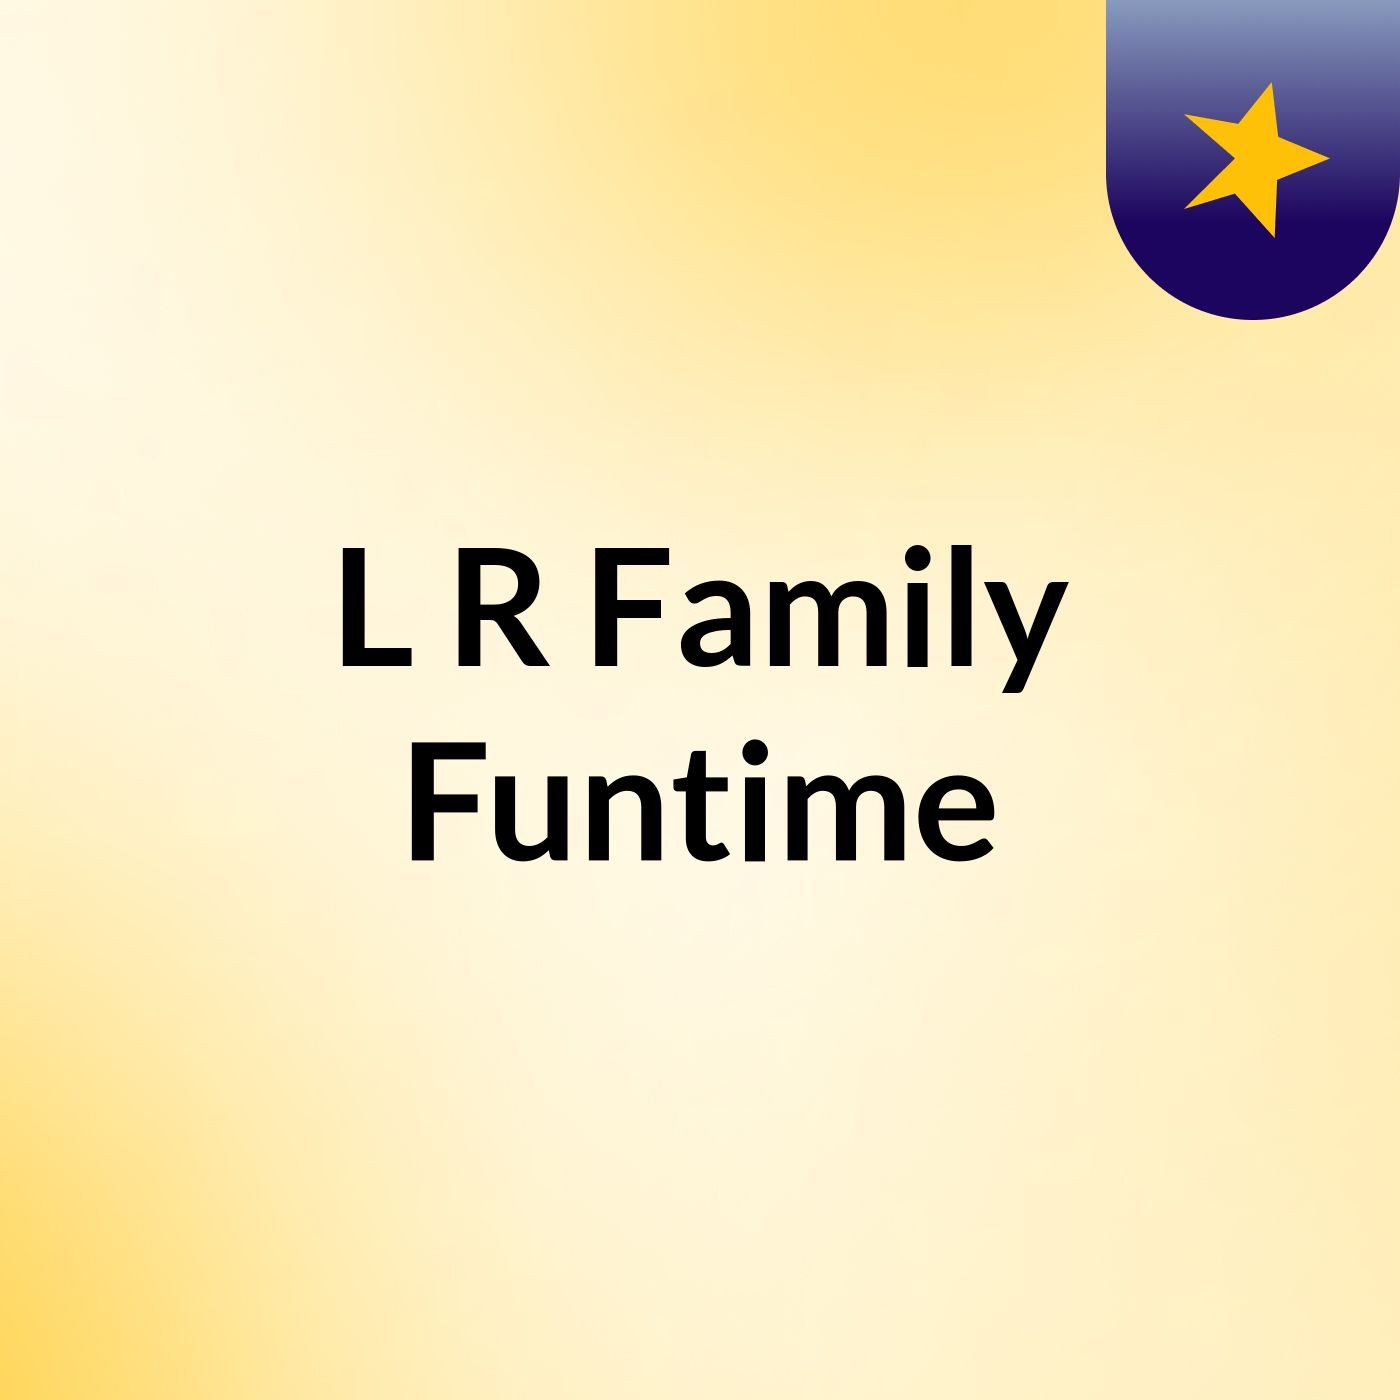 Episode 3 - L&R Family Funtime